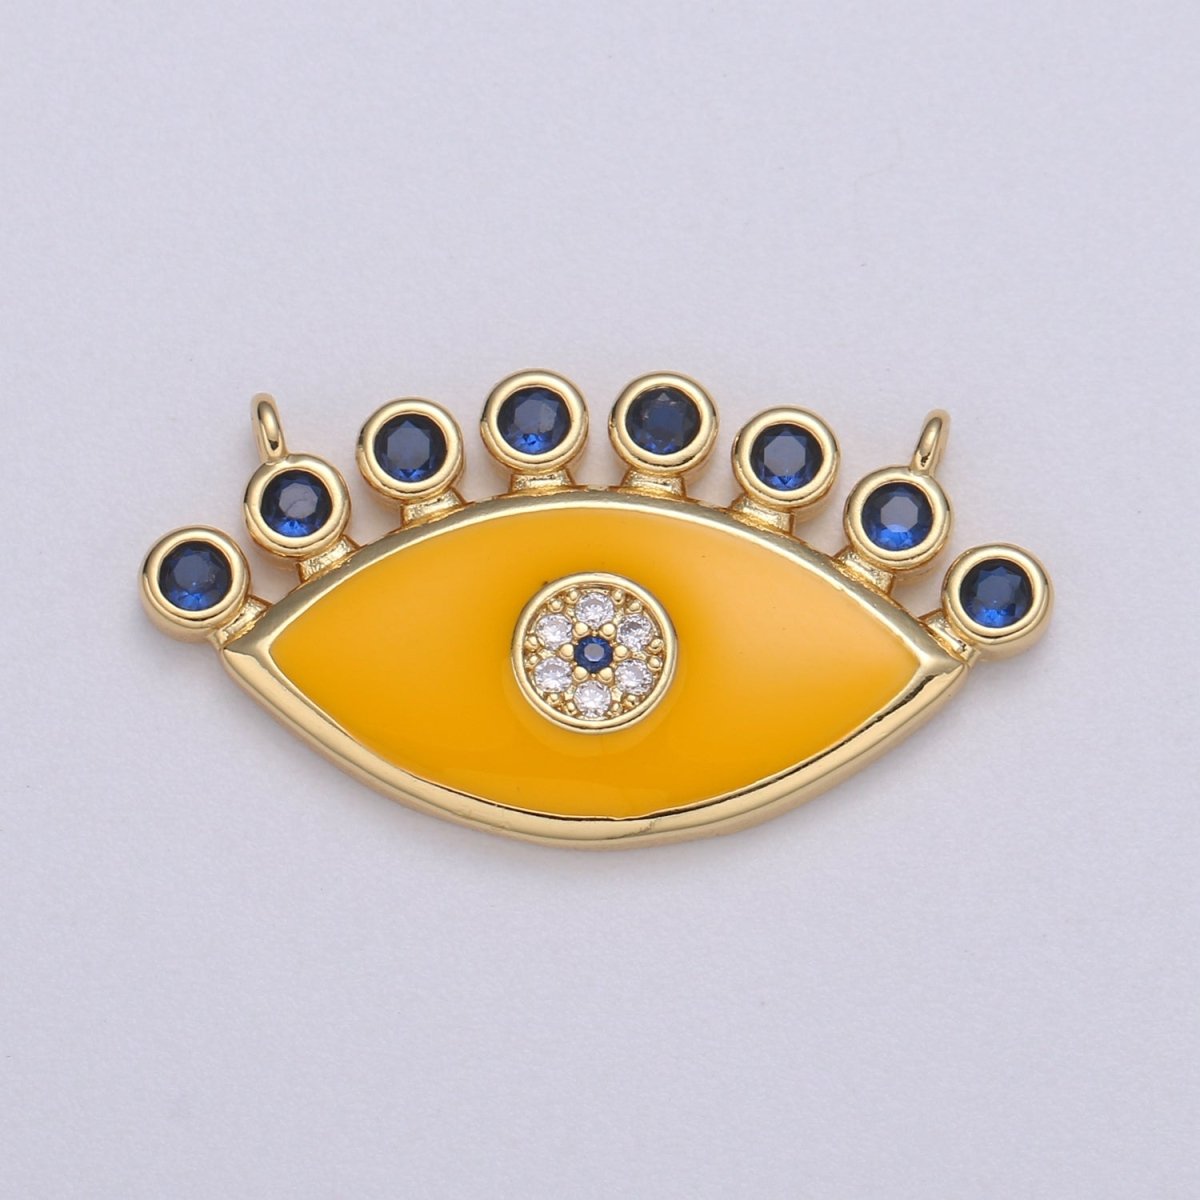 Enamel Evil Eye charm Connector Micro Pave Evil Eye Pendant for Amulet Jewelry Making Supply Protection Blue, Black Pink Red Evil Eye F617 - DLUXCA